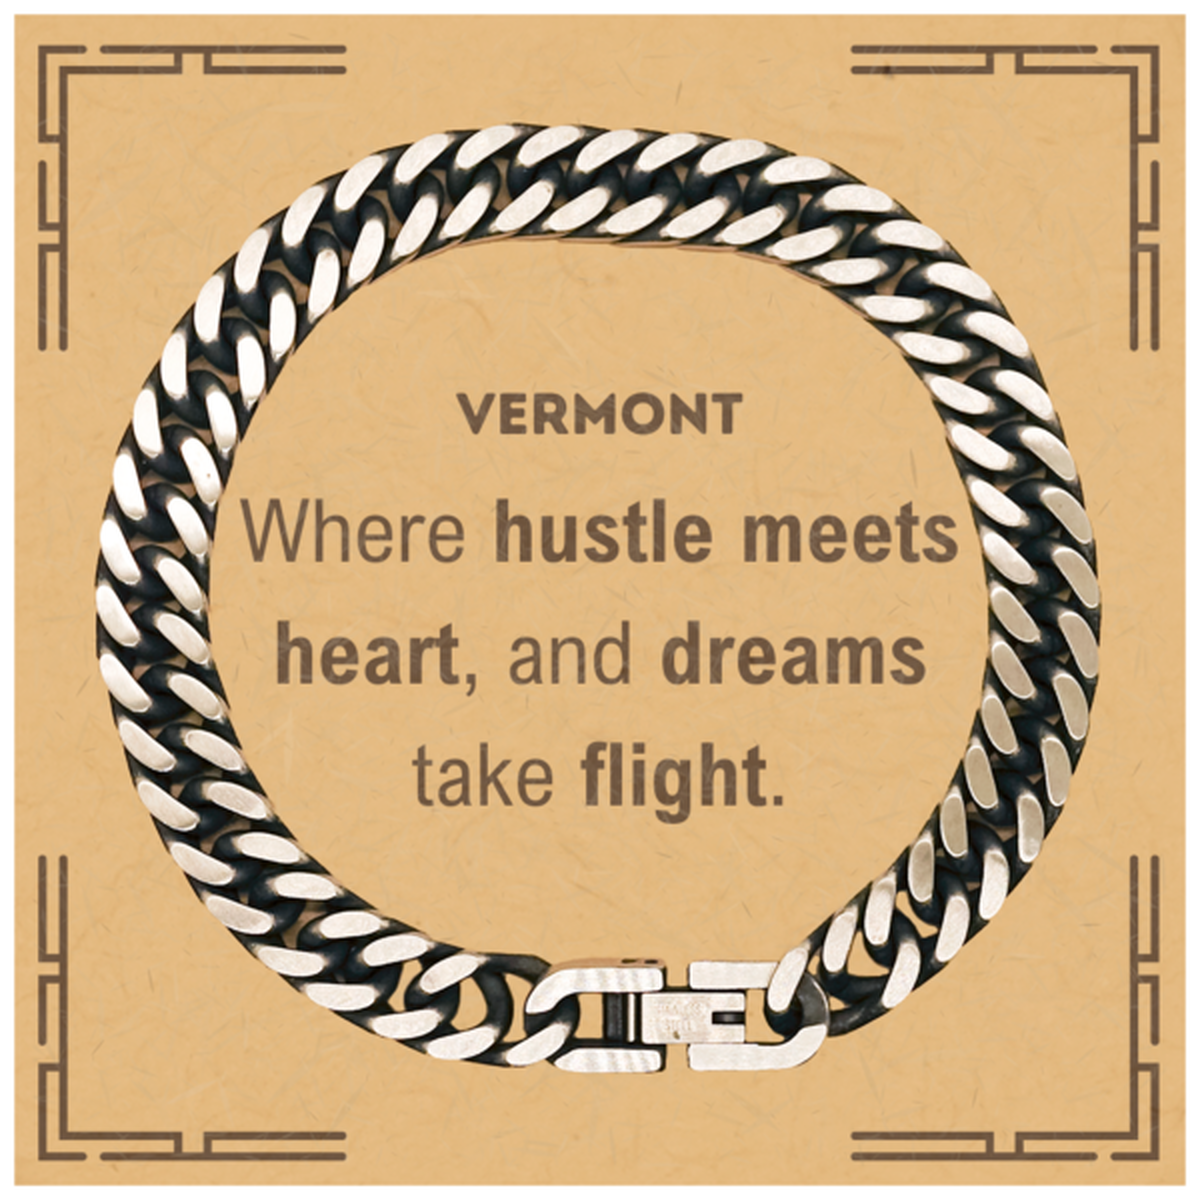 Vermont: Where hustle meets heart, and dreams take flight, Vermont Card Gifts, Proud Vermont Christmas Birthday Vermont Cuban Link Chain Bracelet, Vermont State People, Men, Women, Friends